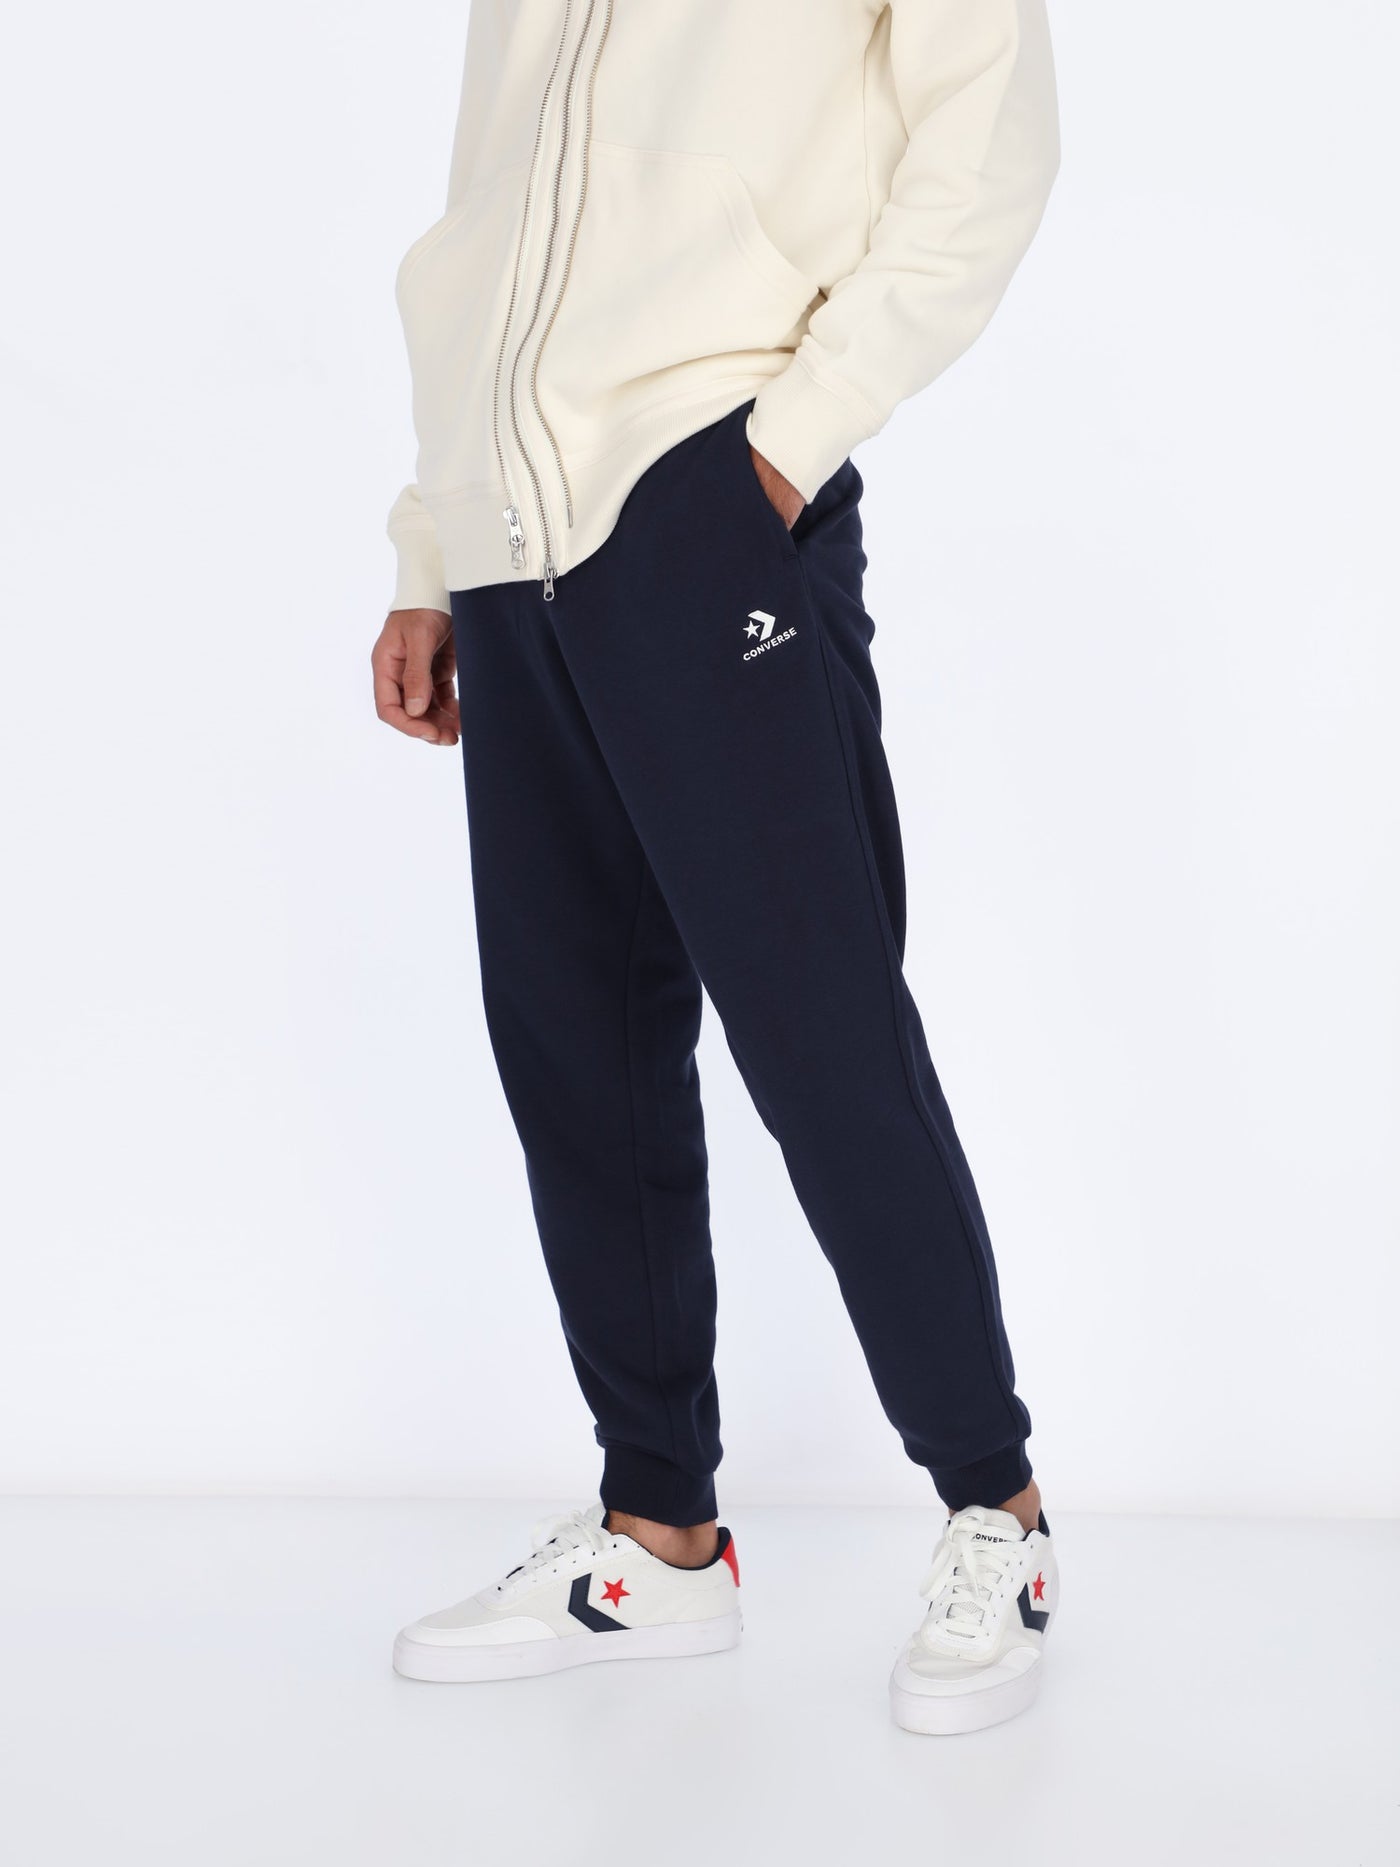 Men's All Star Track Pants - 10020369-A03